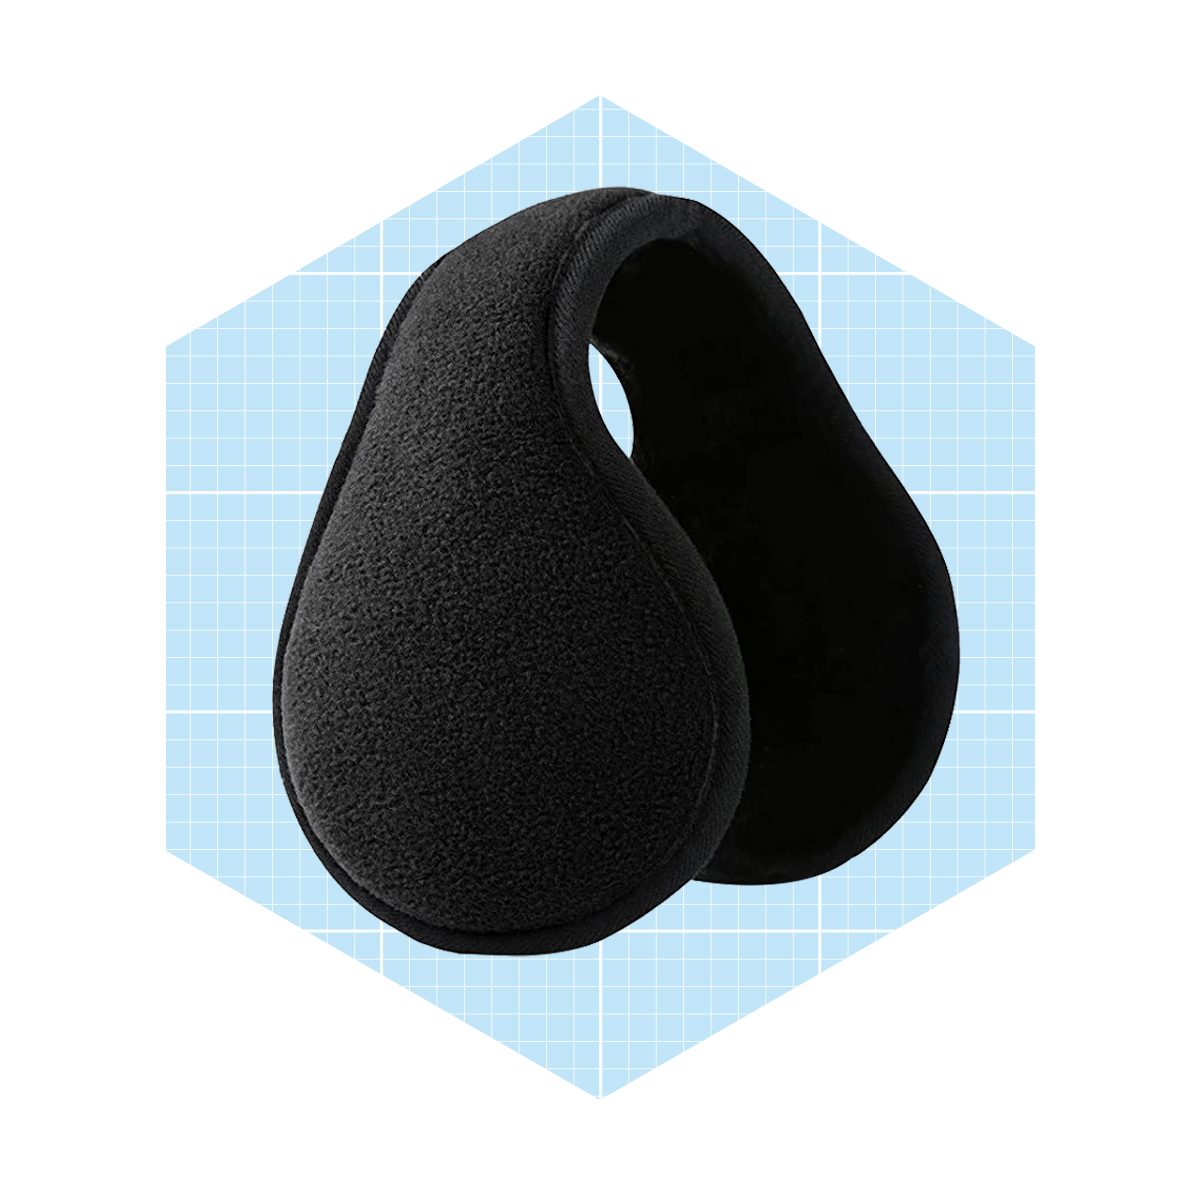 Ear Muffs For Winter For Men And Women Ecomm Amazon.com